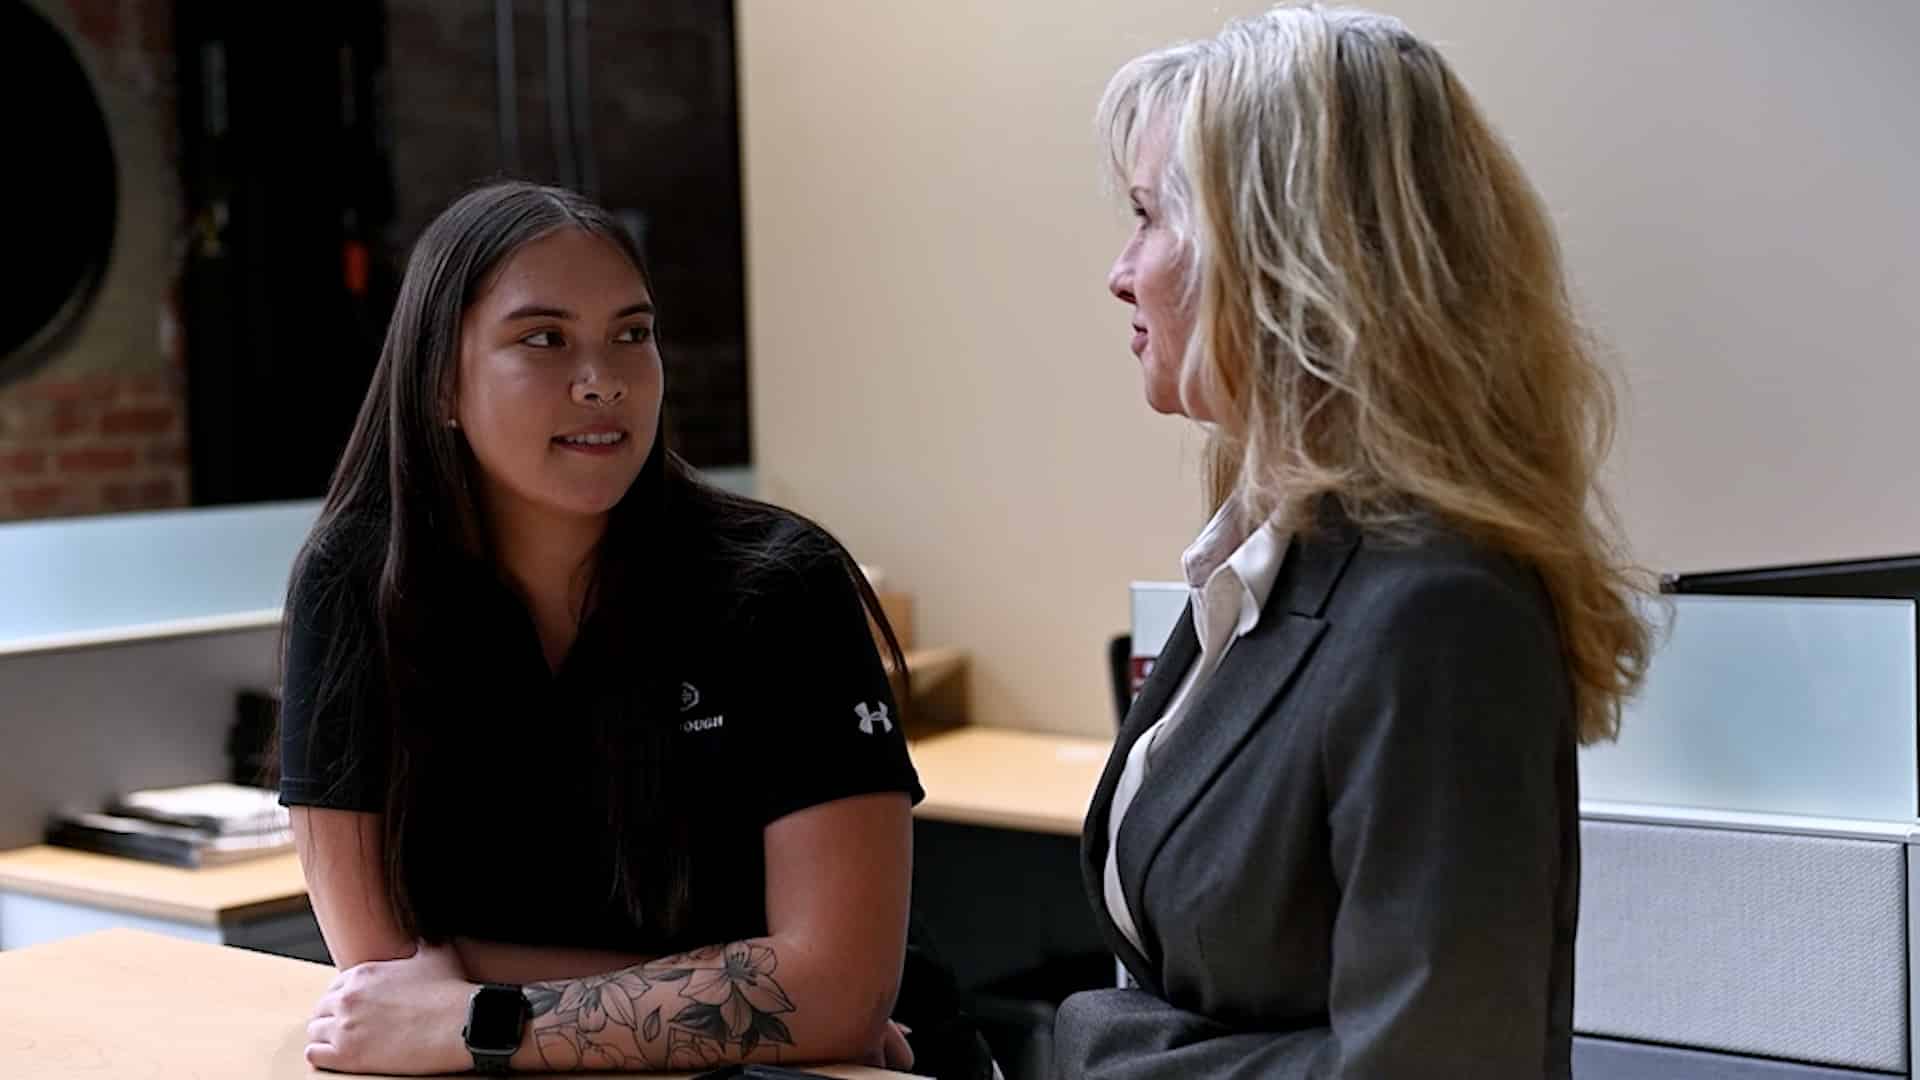 A former McGough intern (now an employee) talking with her mentor in an office